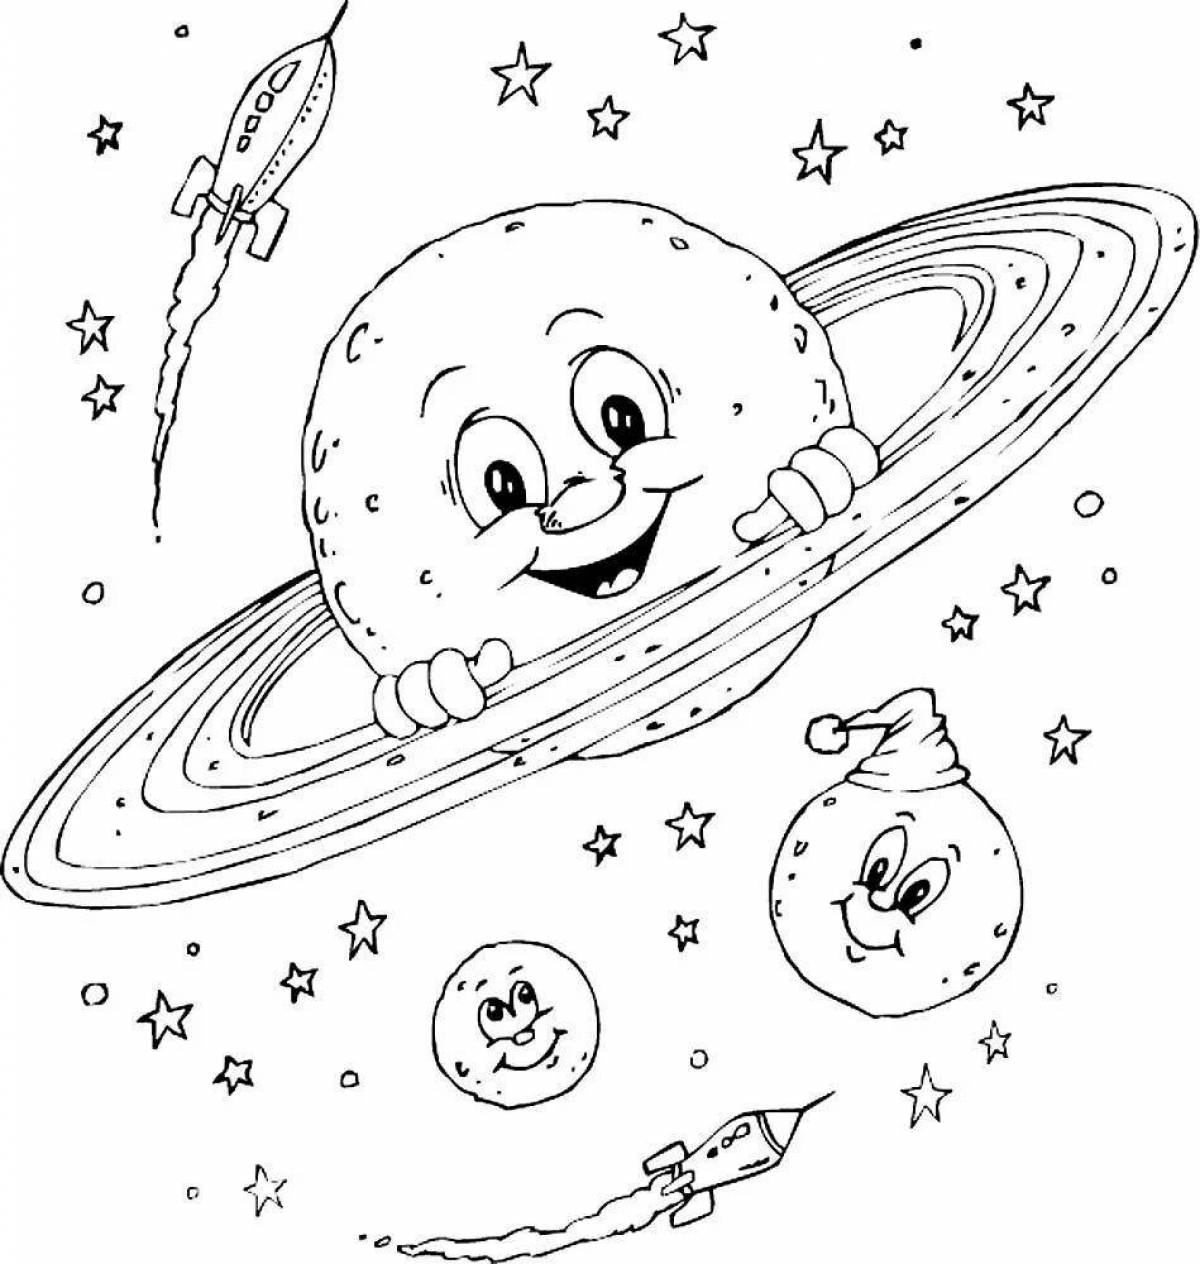 Fun space coloring book for kids